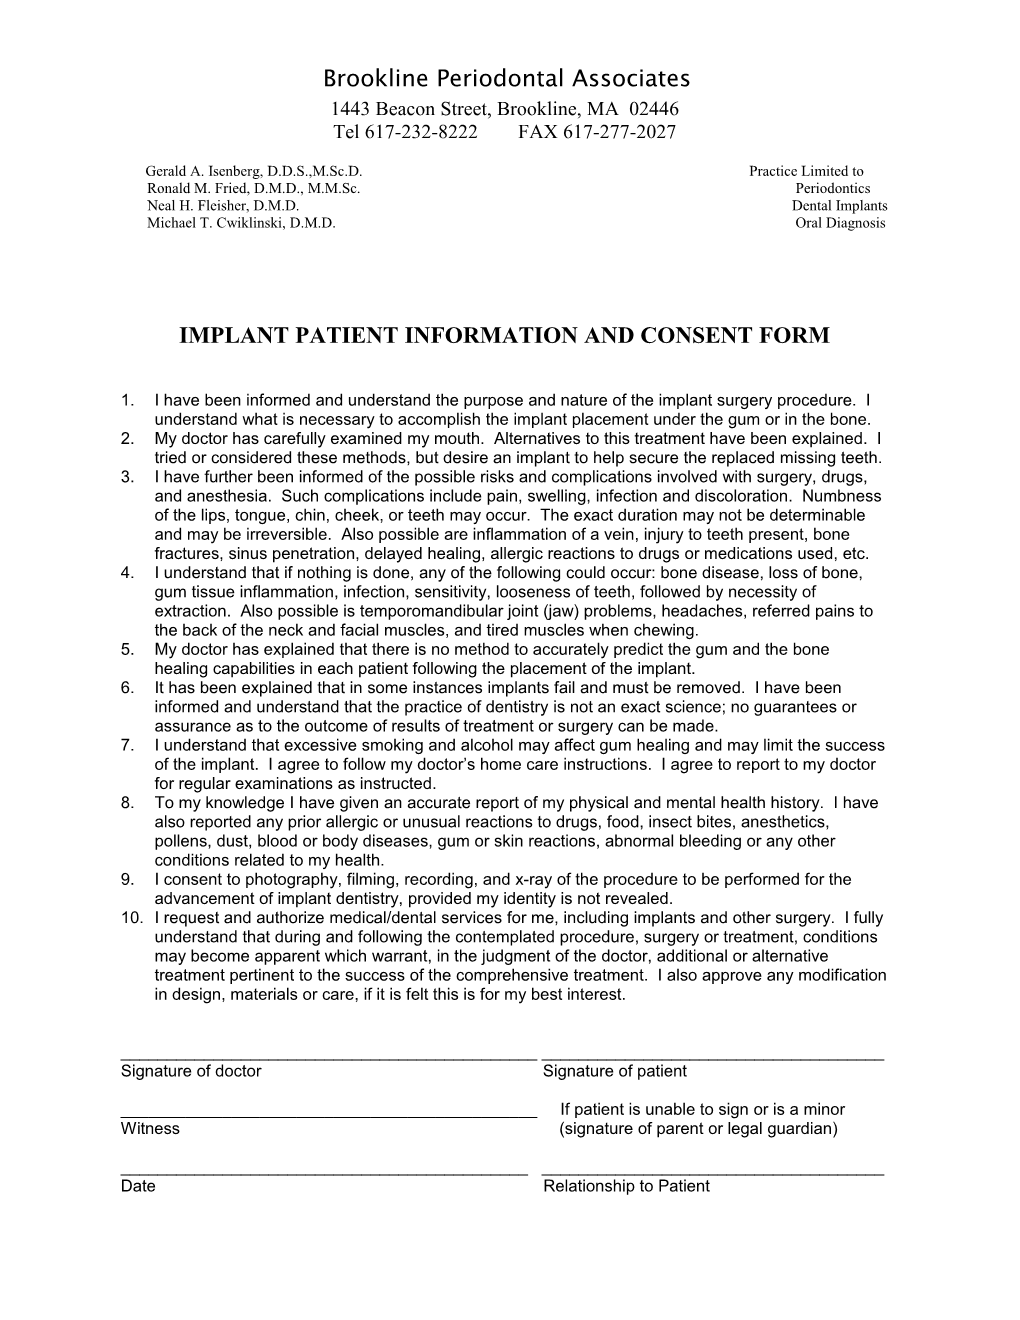 Implant Patient Information and Consent Form